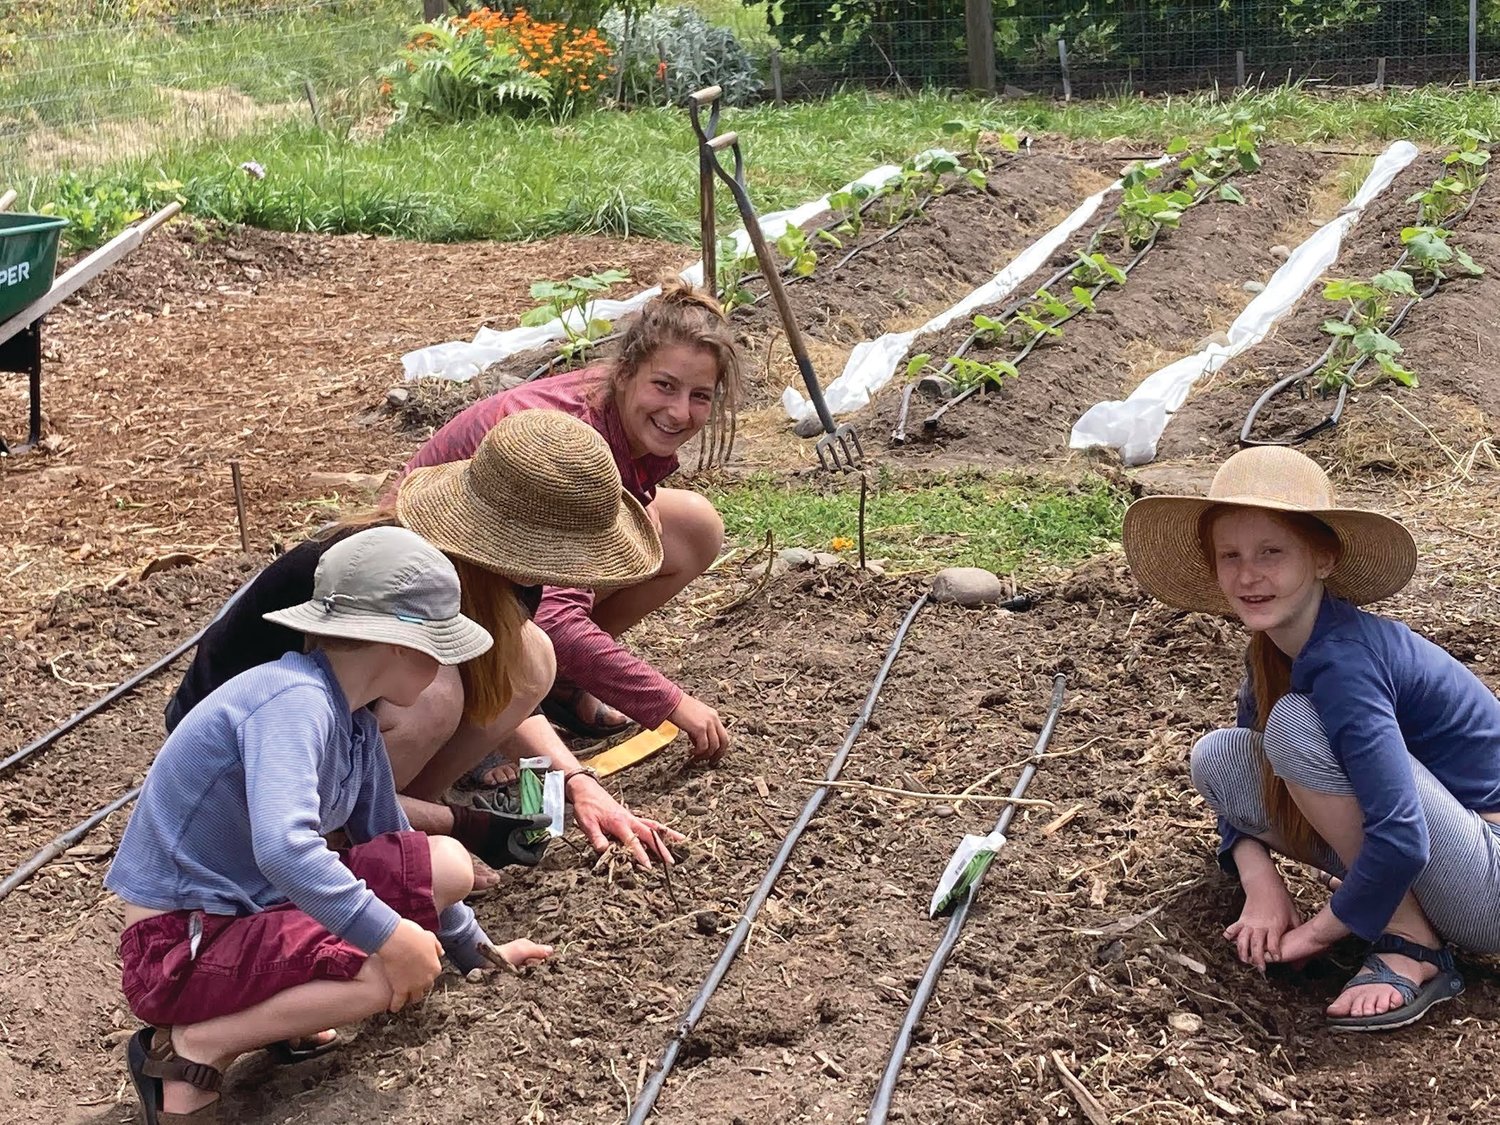 Cabbett Kuzma, Holly Kuzma, Emma Reisman, and Anora Kuzma have planted, saved, and shared locally developed shelling bush bean seeds at Shooting Star Farm, a community-based work-trade CSA in Port Townsend.